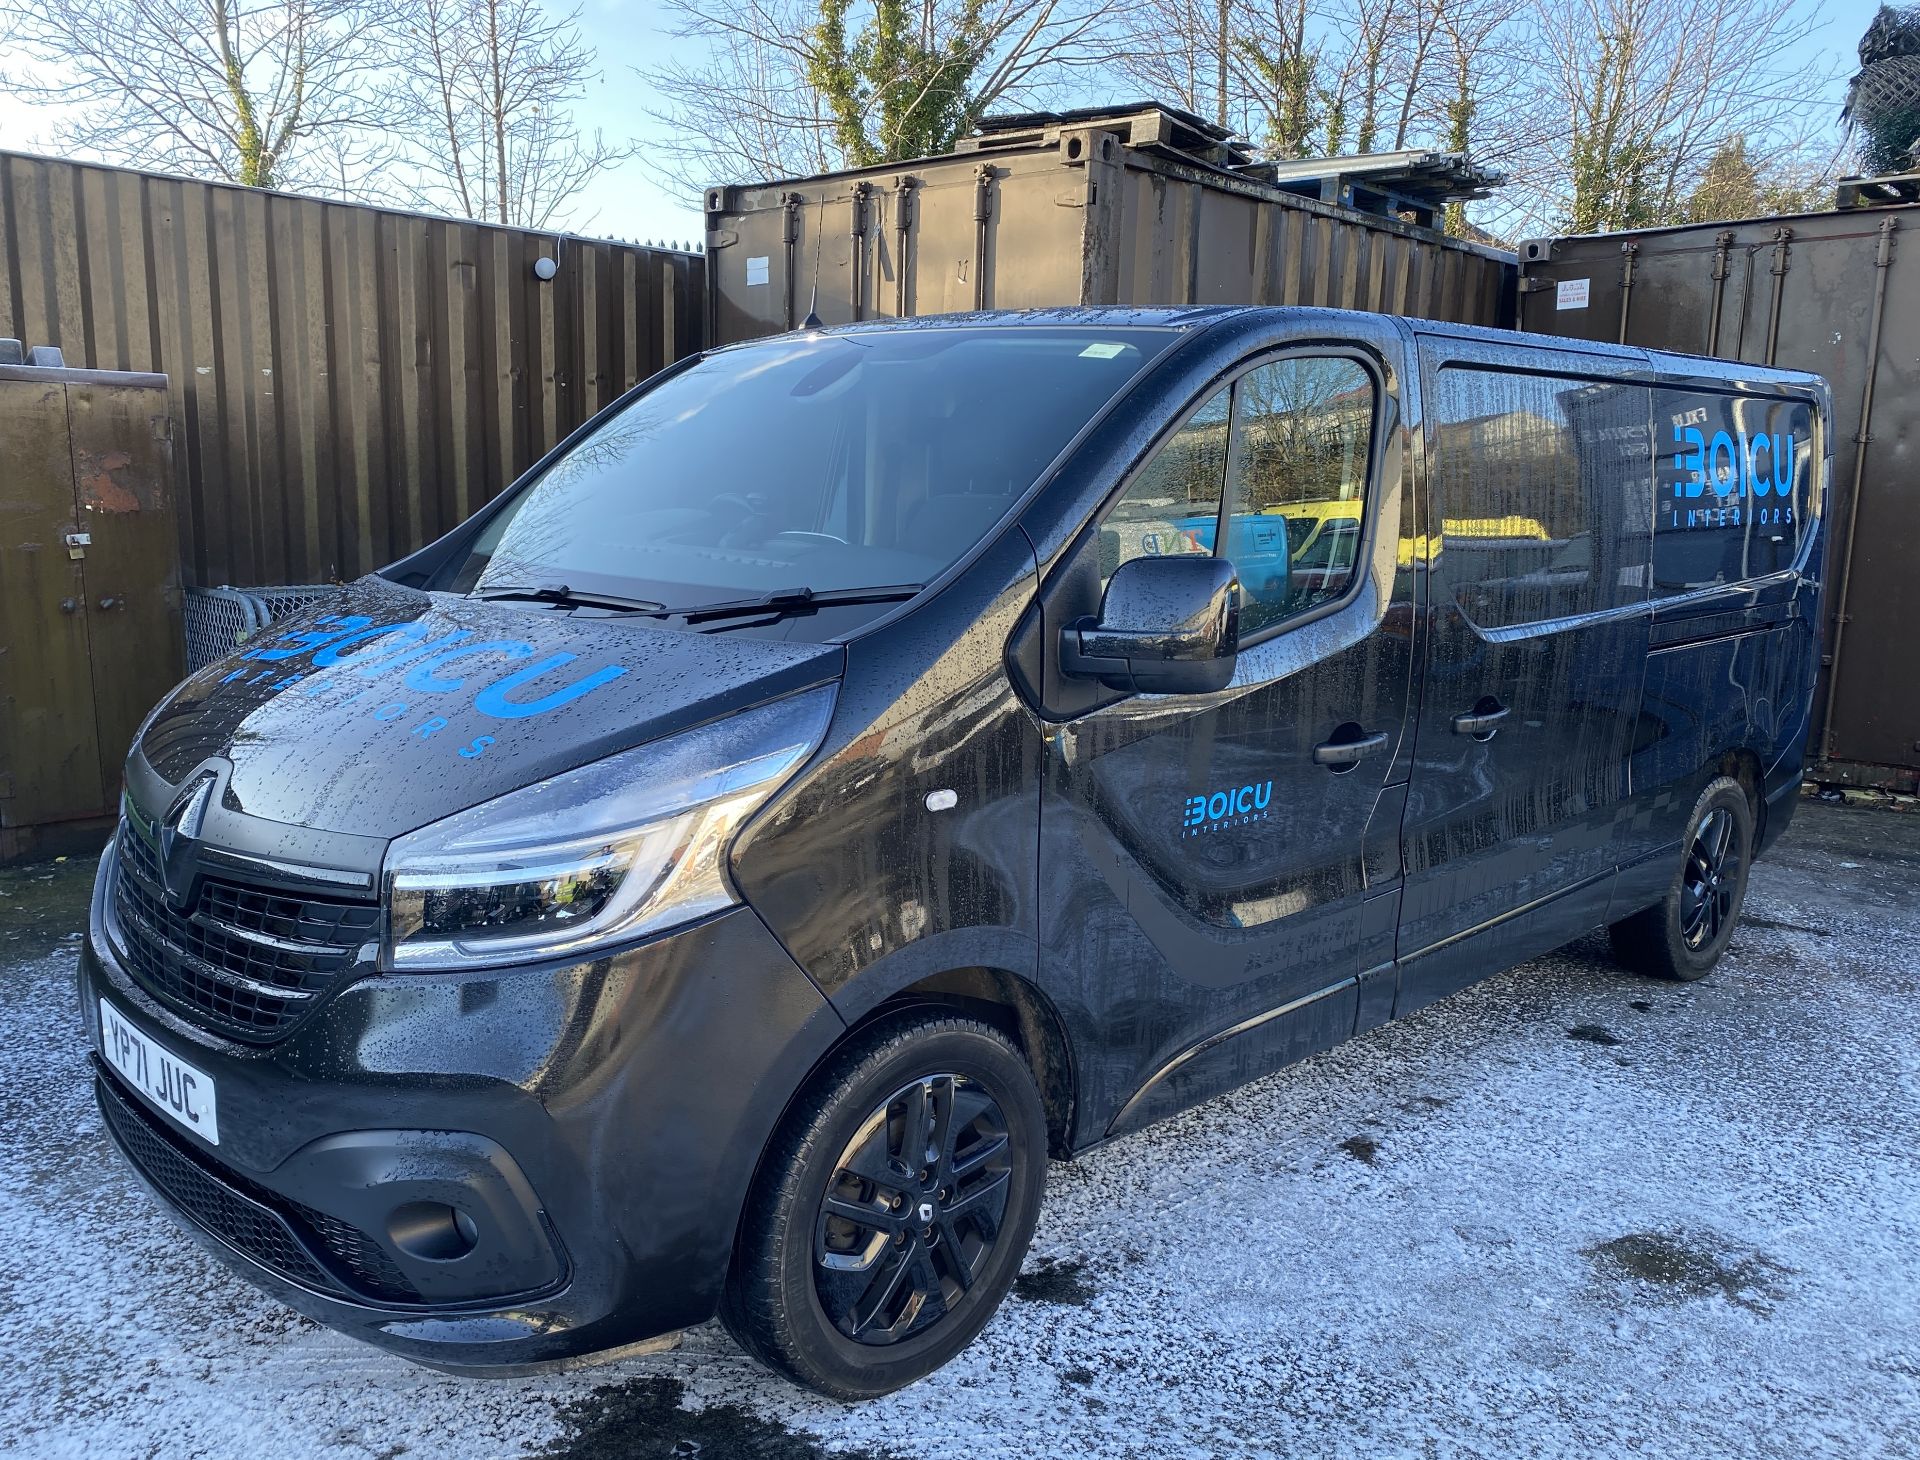 RENAULT TRAFIC LL30BLK ED ENGY D PANEL VAN - AUTOMATIC - Diesel - Black. - Image 11 of 45